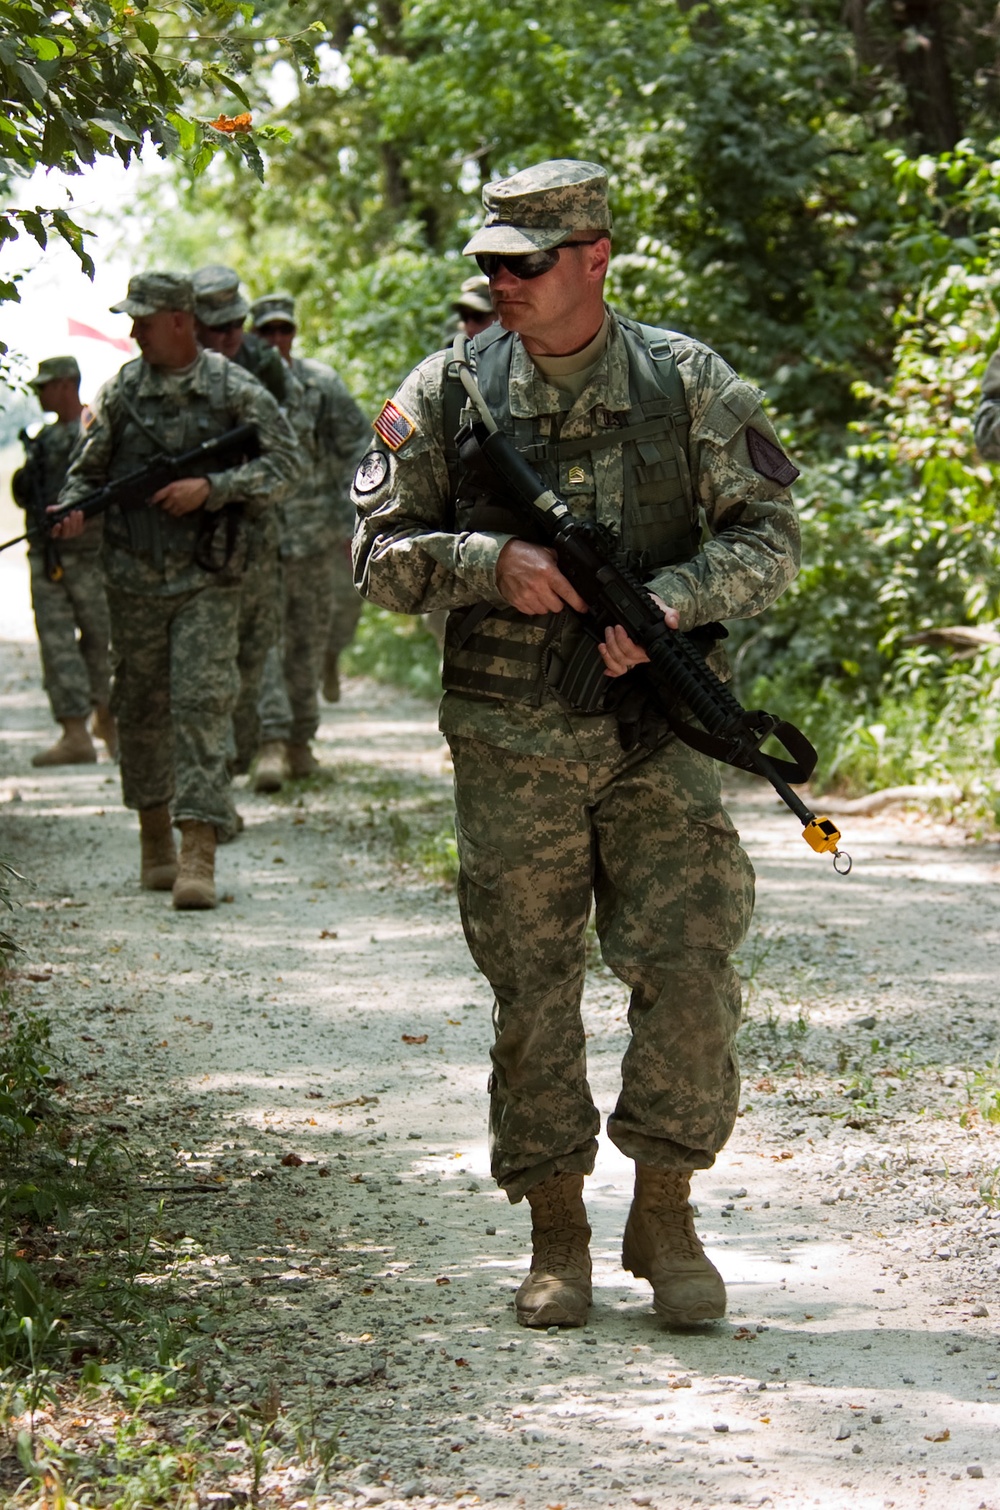 Warrant officer candidates strive to be the best